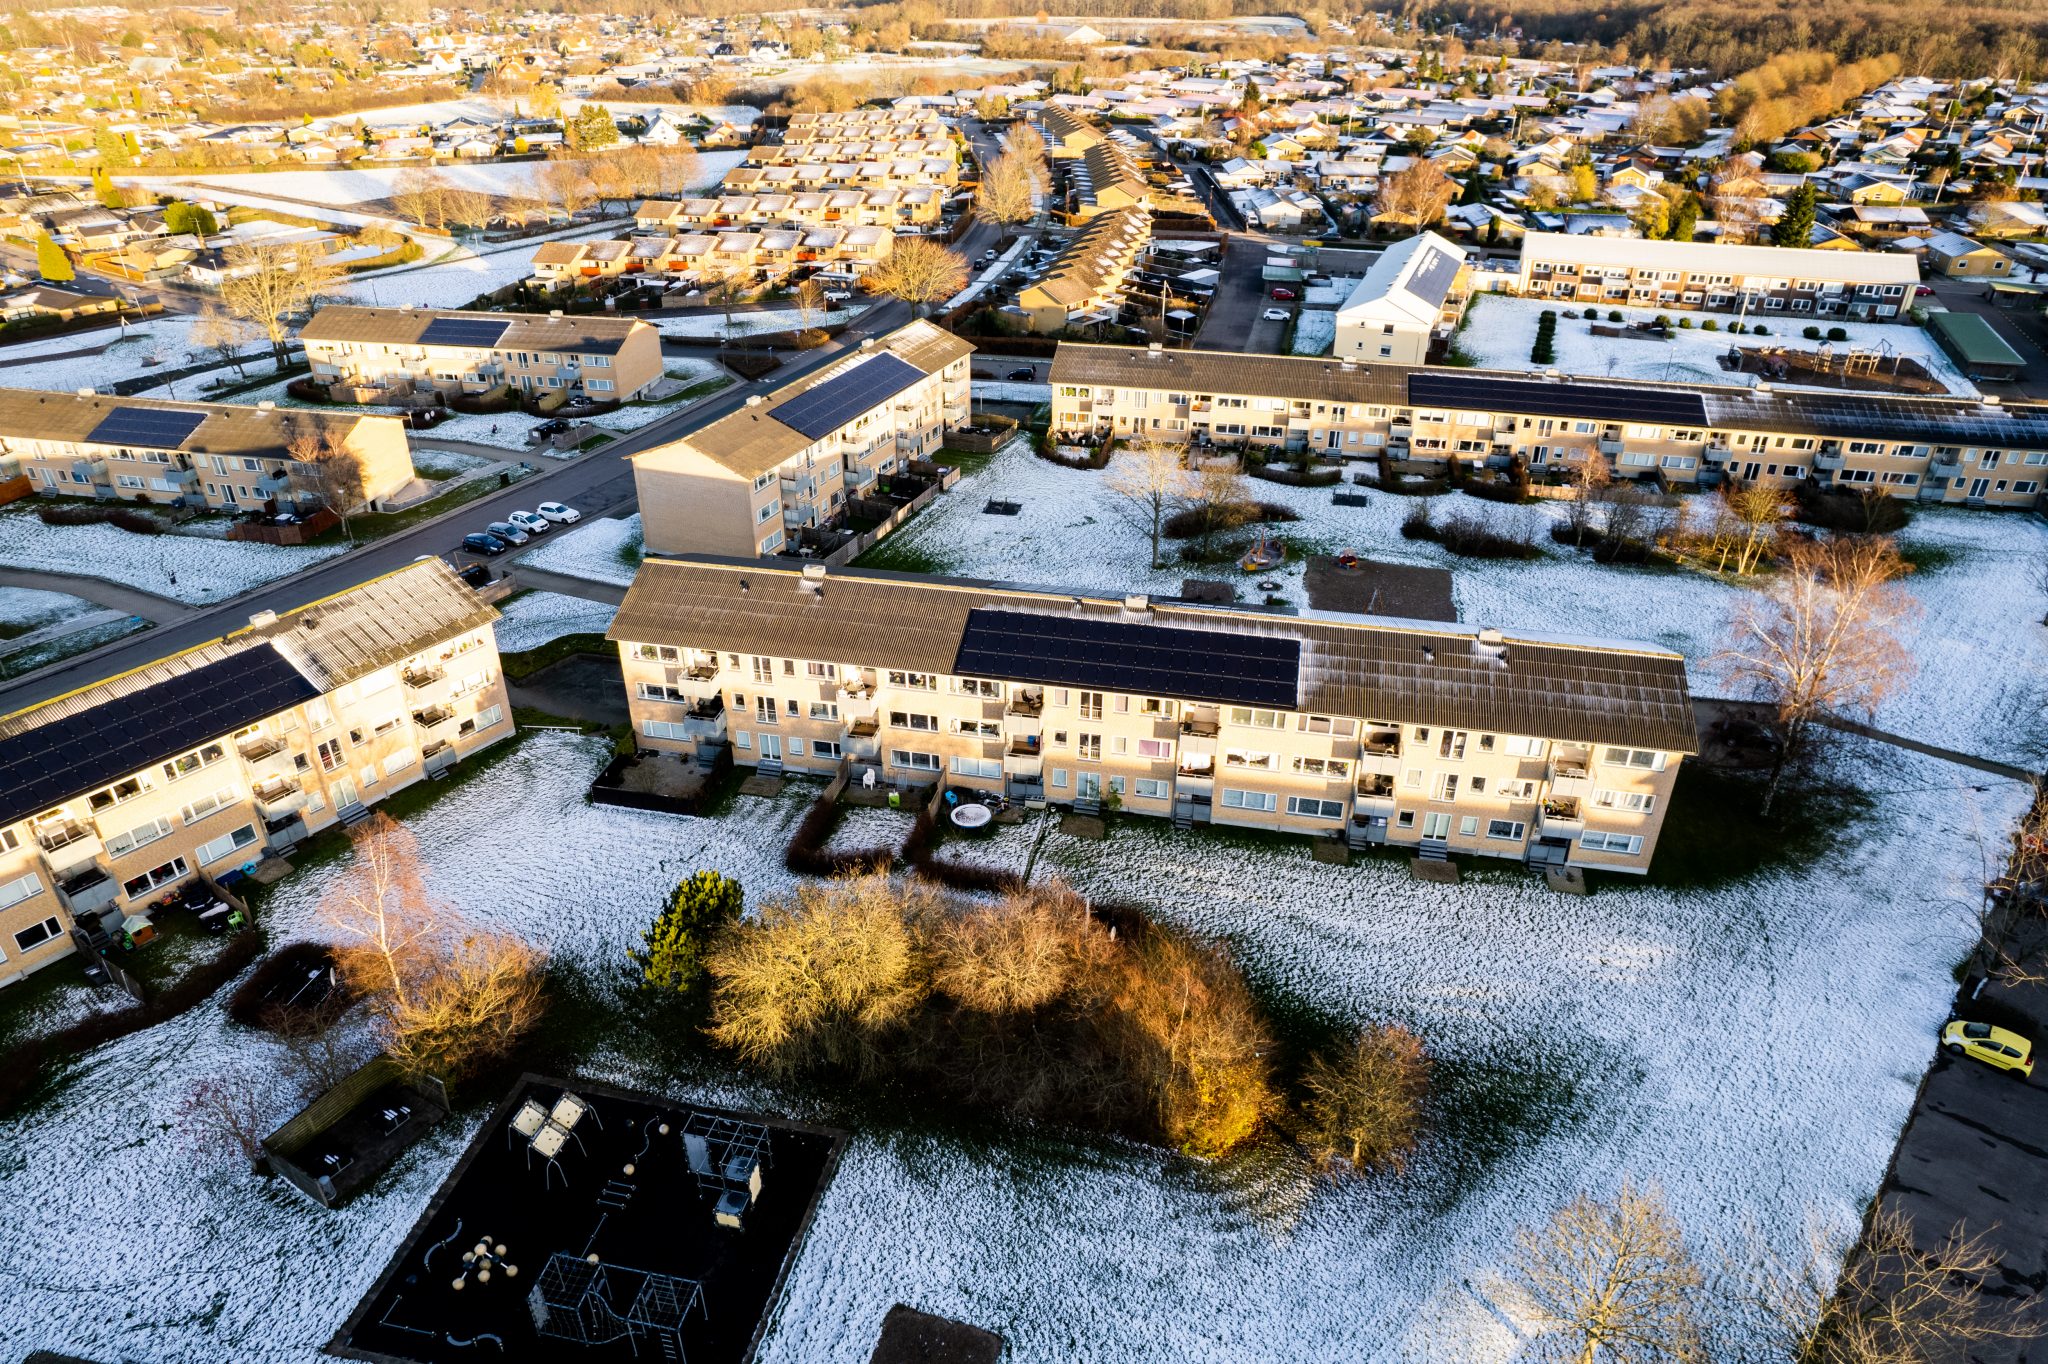 Overview of demo site with 19 social housing blocks. Photo: Peter Bjerke